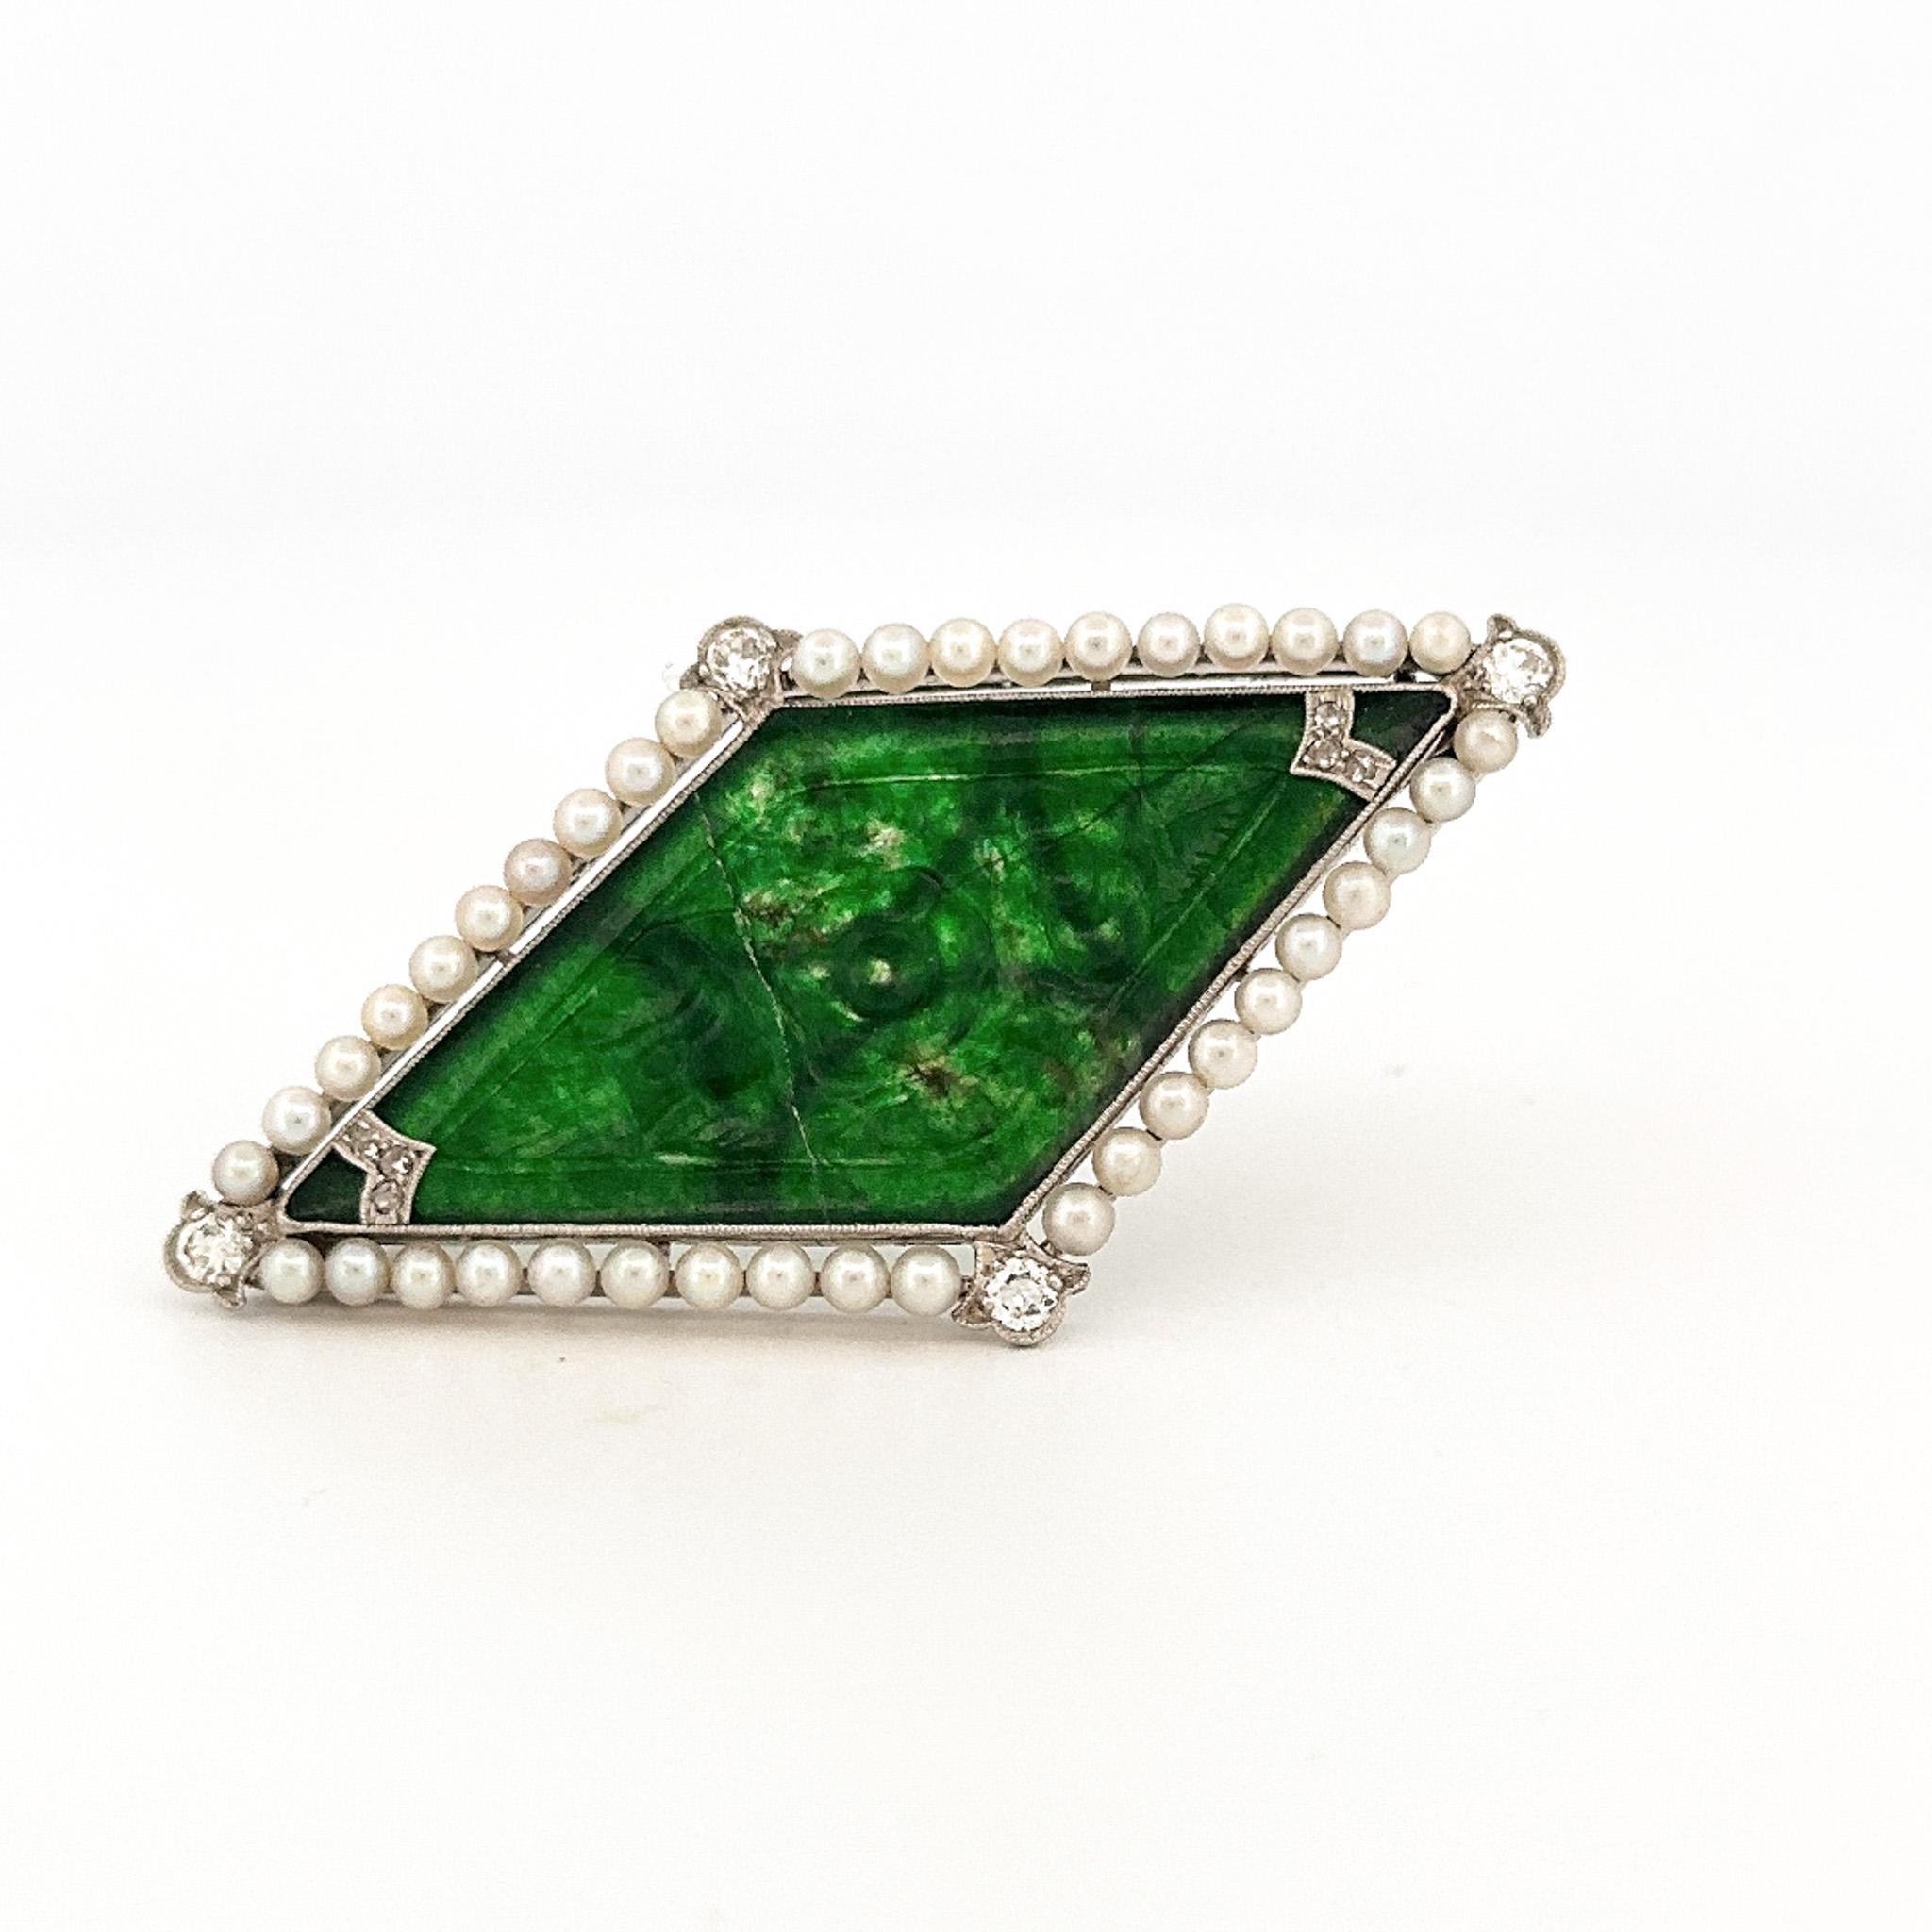 From the Eiseman Estate Jewelry Collection, this art deco inspired style platinum carved jade, pearl, and diamond pin. This pin is crafted with a carved jade slate surrounded by pearls with diamond accents. The jade is fractured from previous owner.
